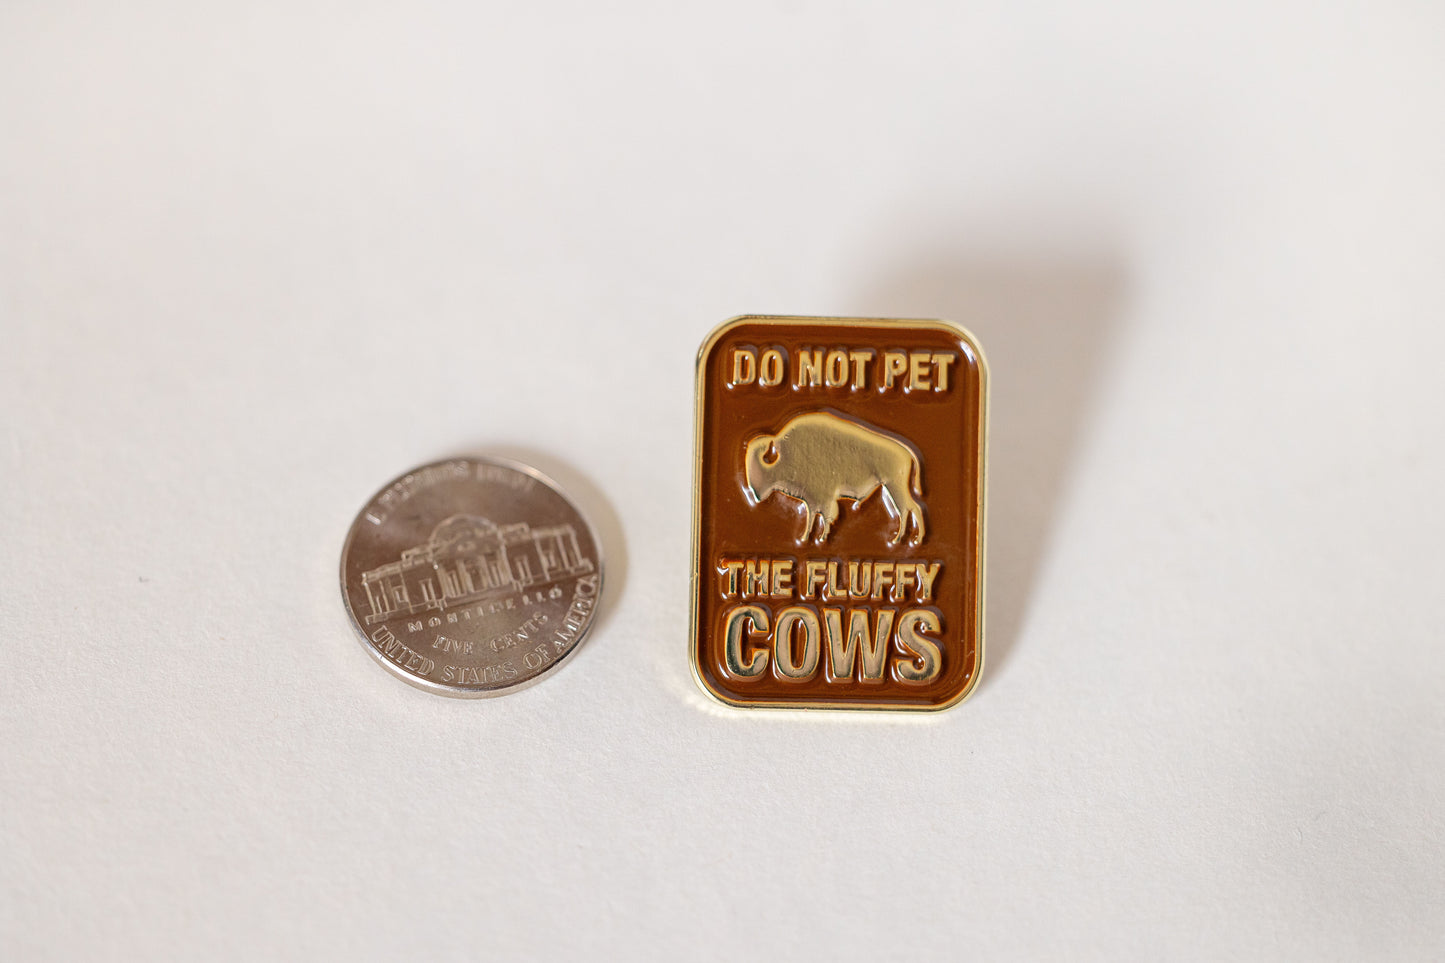 Don't Pet The Fluffy Cows| Enamel Pin | Collectible Lapel Pin